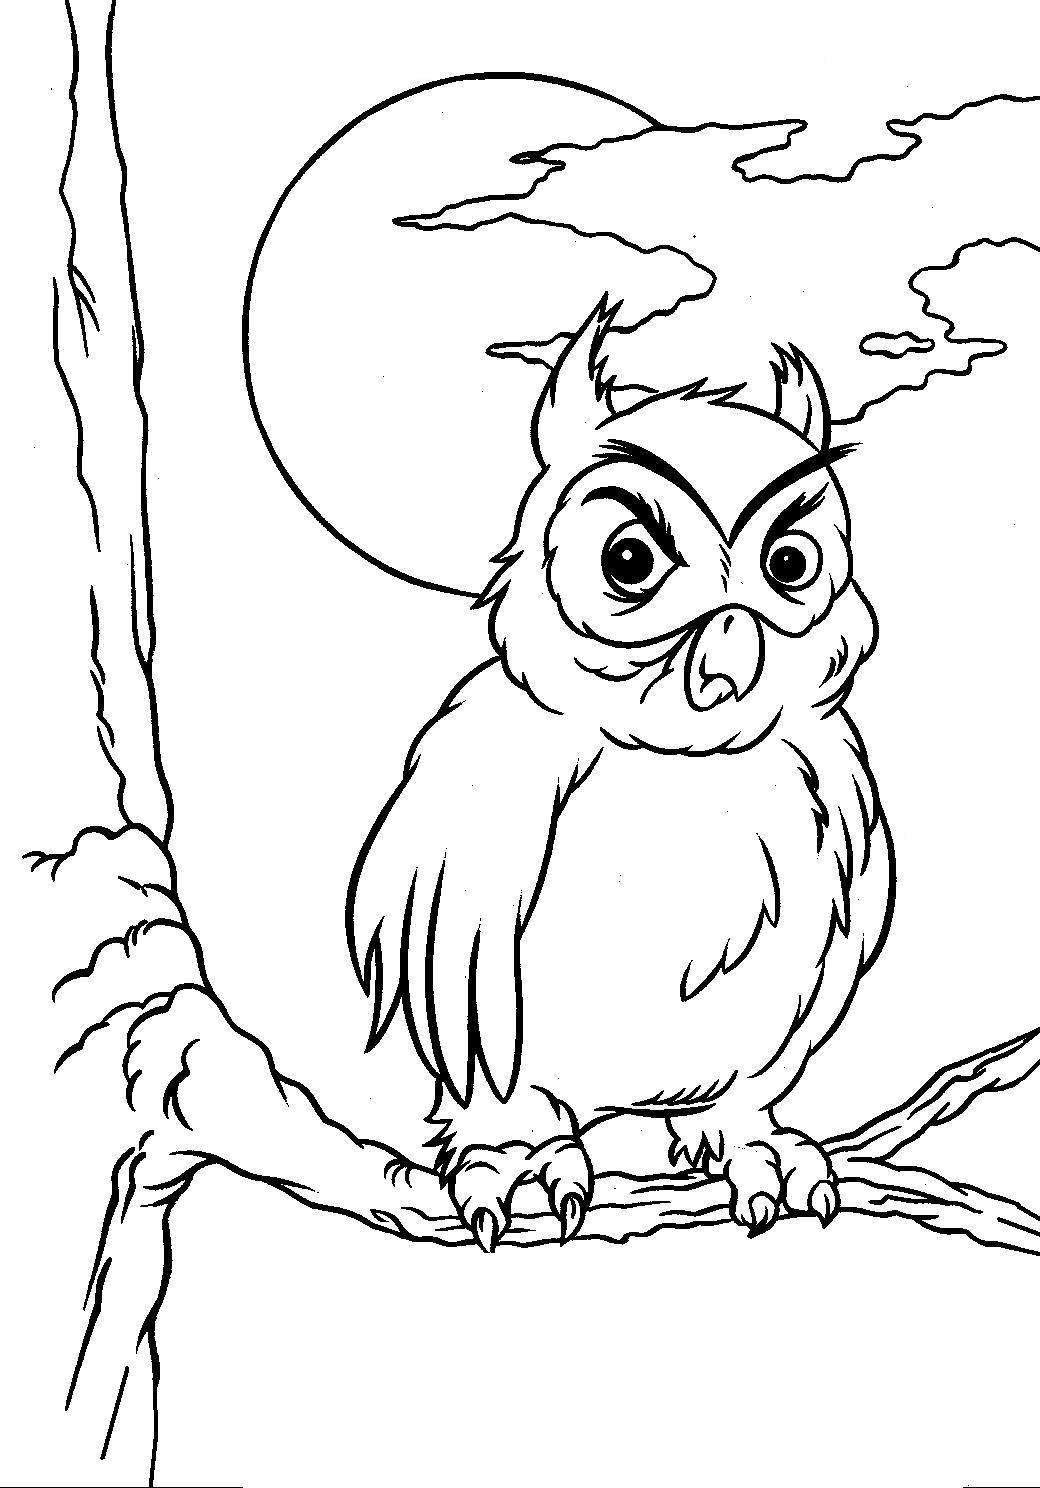 Printable Owl Pictures To Scare Birds